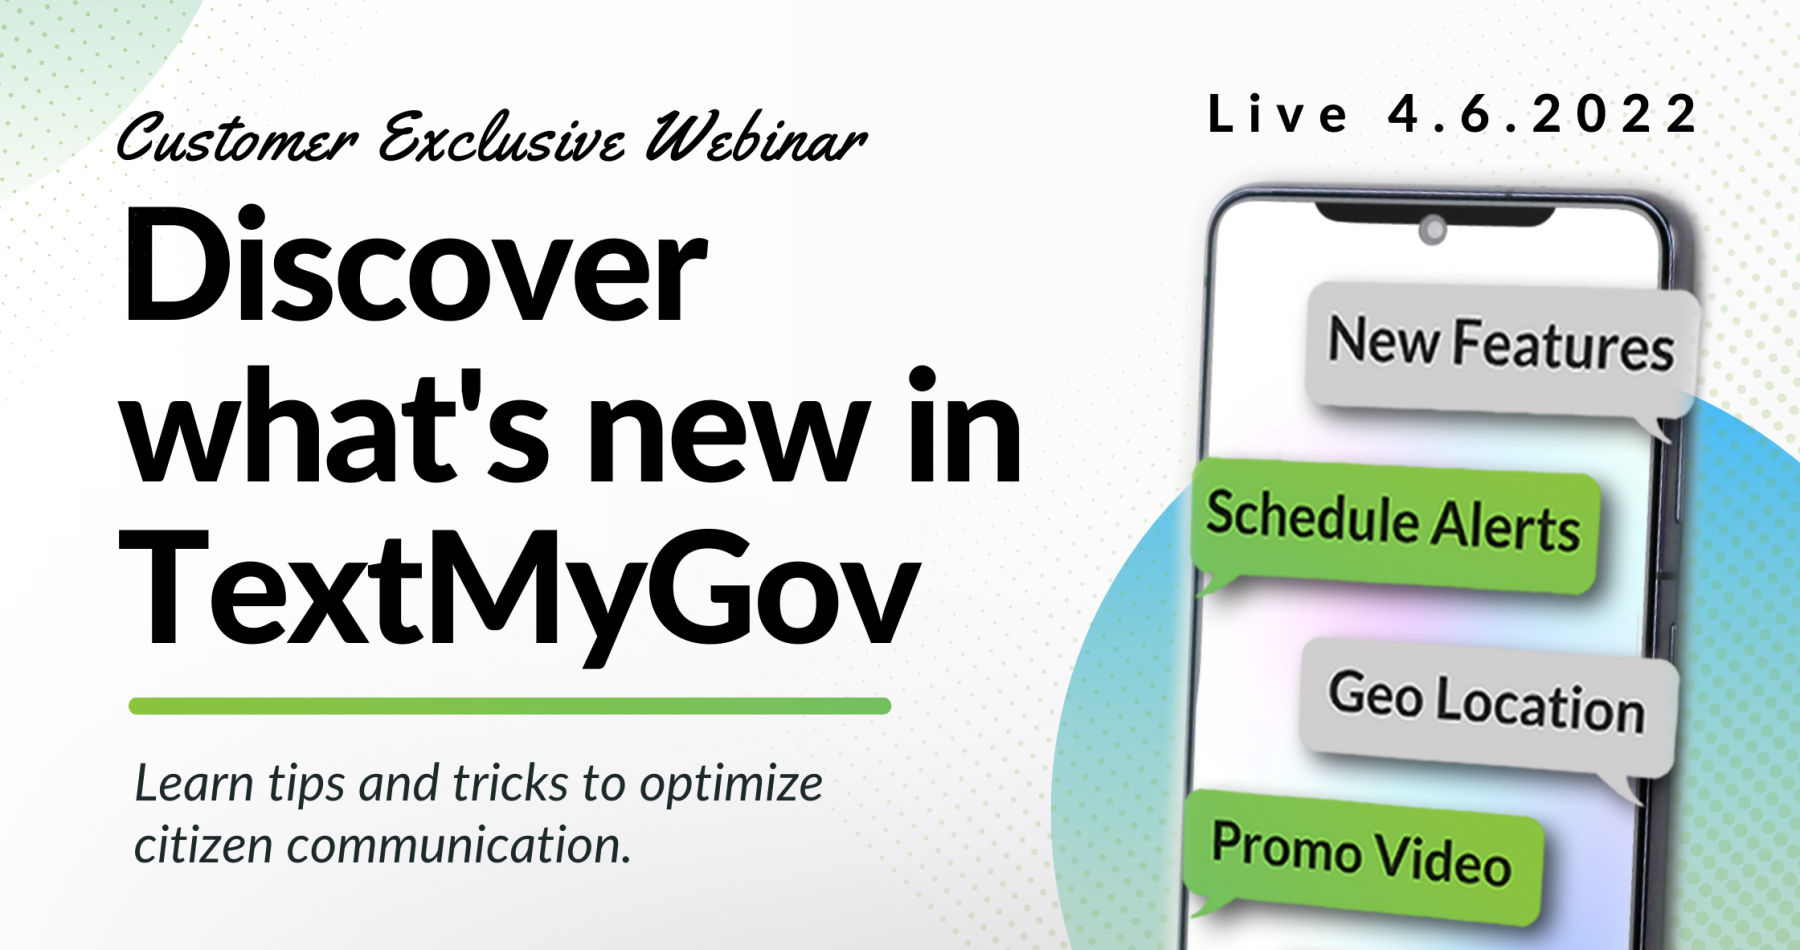 Customer Exclusive Webinar | Discover What's New in TextMyGov